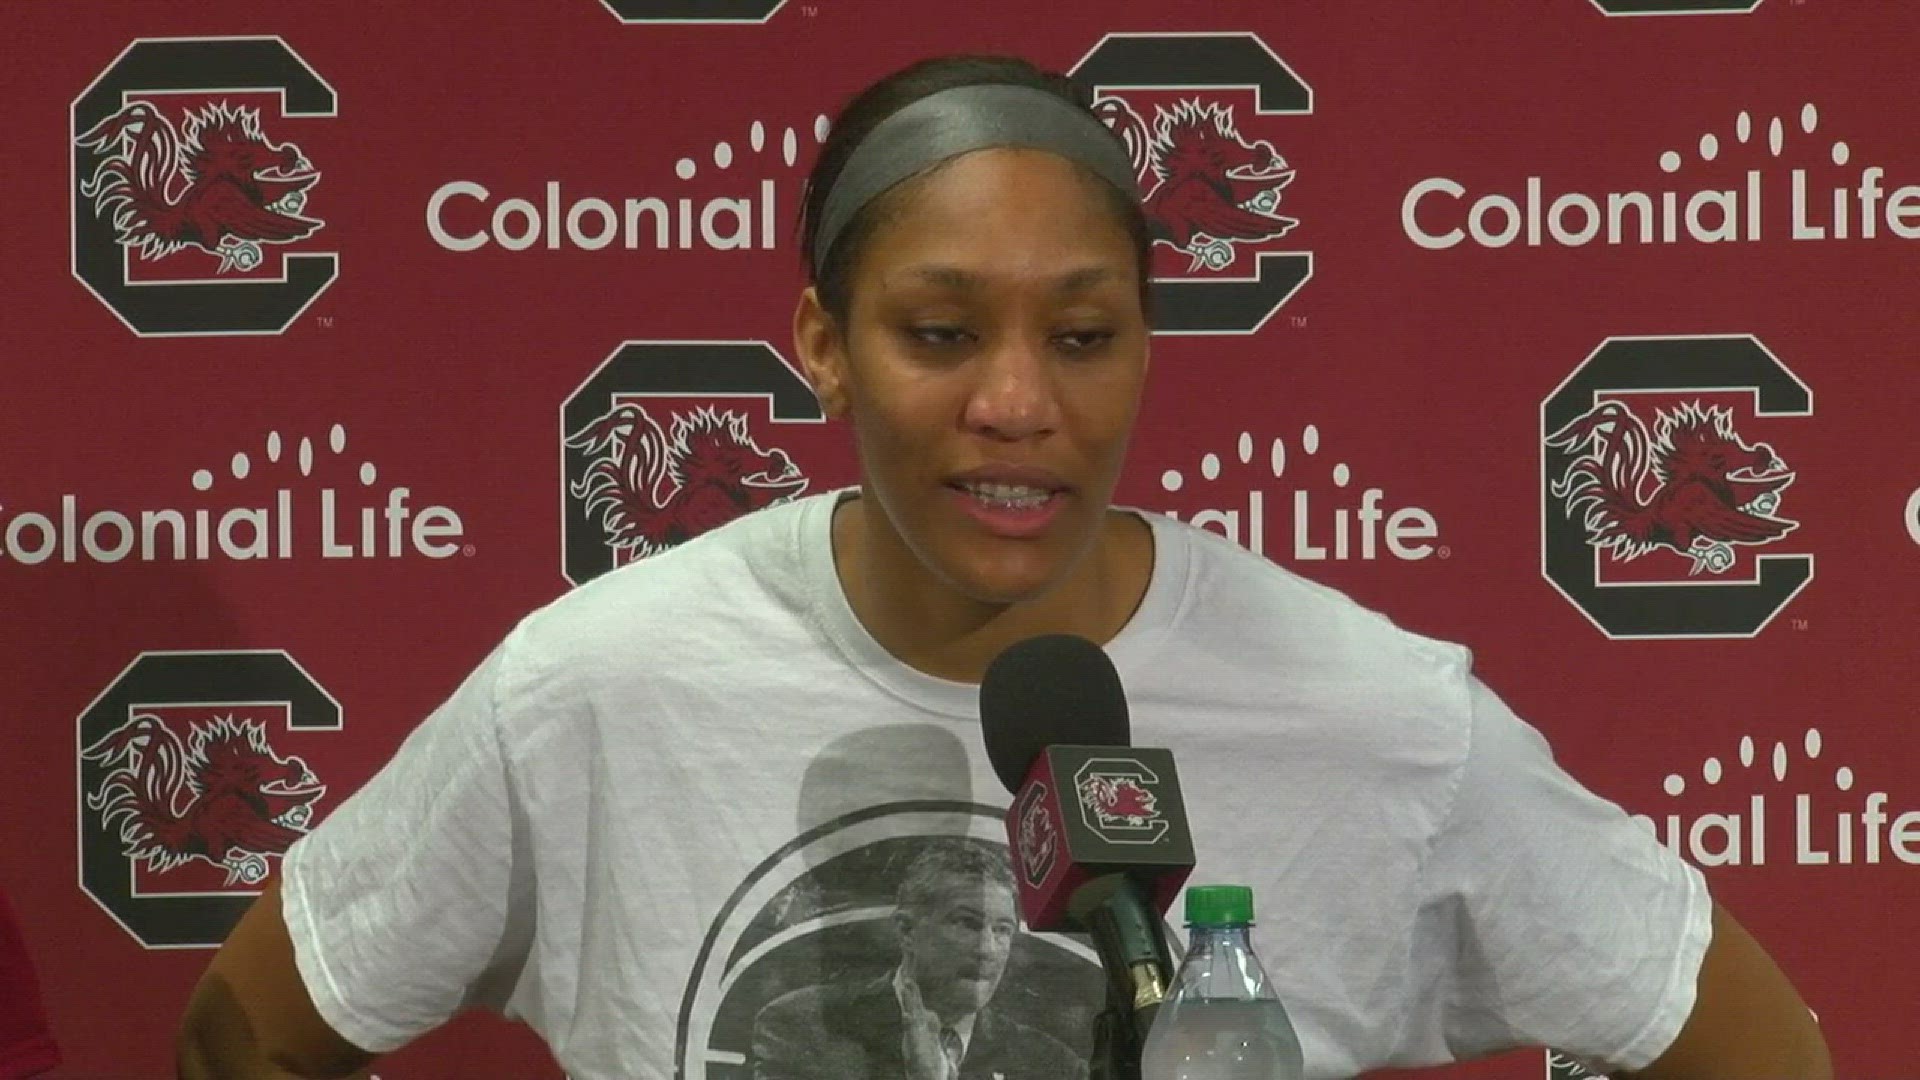 The Gamecocks defeat Kentucky 81-63 on Sunday to improve to 11-3 in the SEC which is second place. A'ja Wilson scored 29 points and grabbed 9 boards in the win. Her and head coach Dawn Staley talk about closing out the regular season strong despite not wi